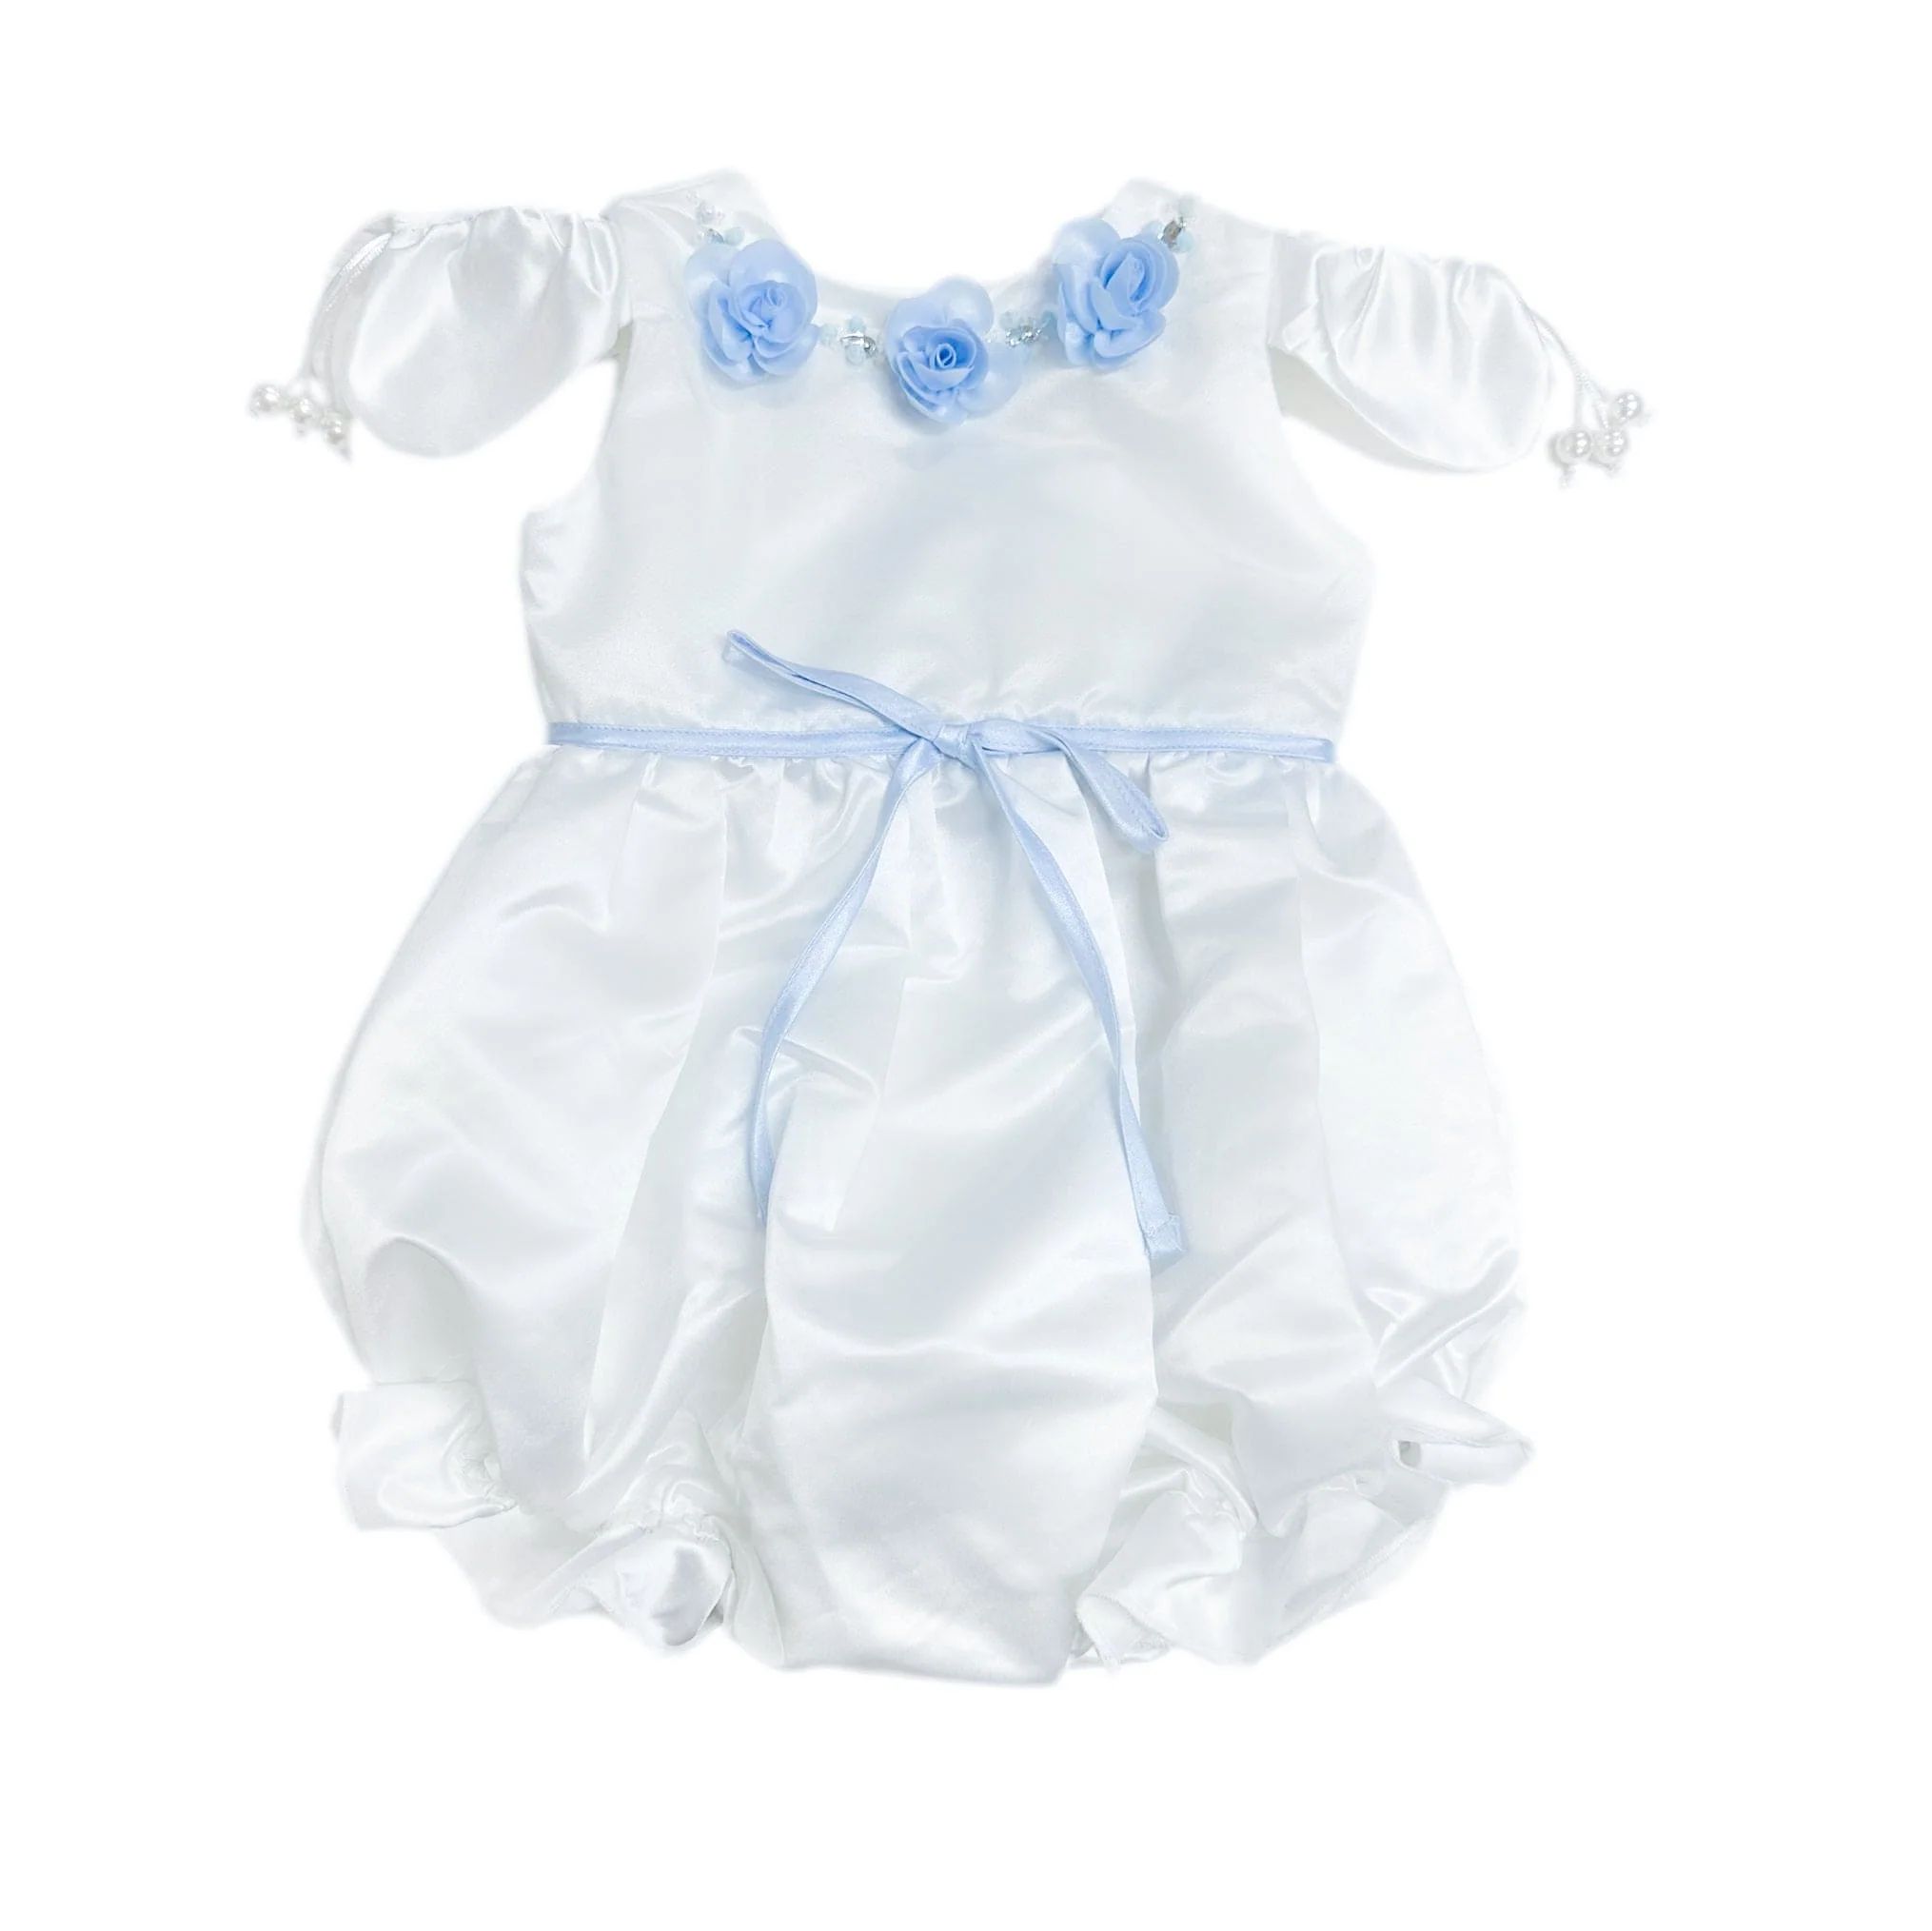 Daphne White Satin Romper with Blue Embroidery | petite maison kids